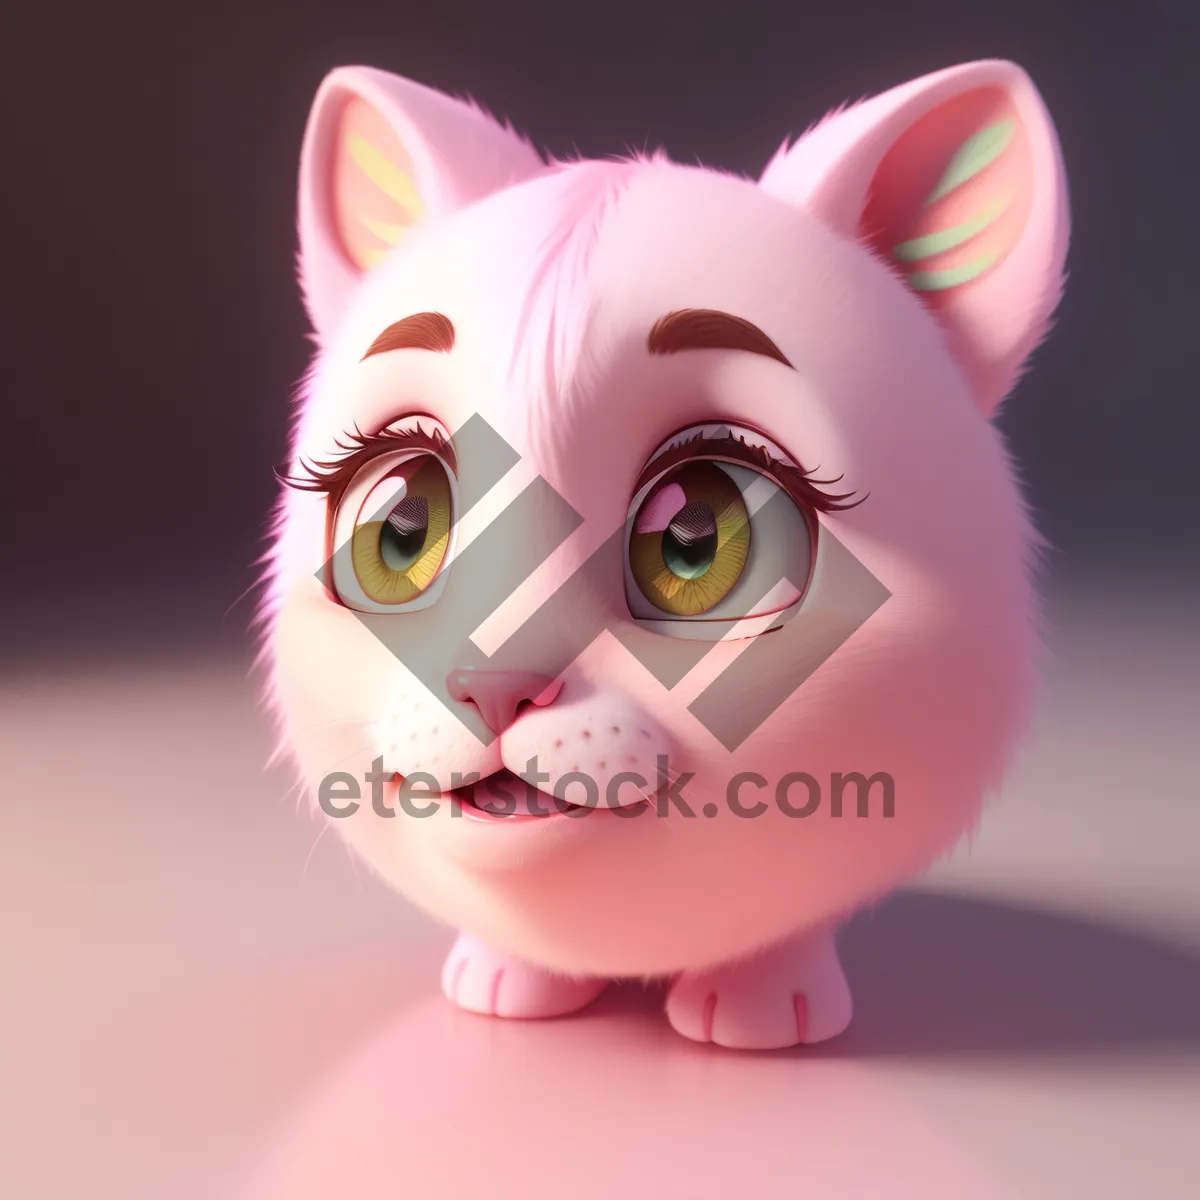 Picture of Pink Piggy Bank for Savings and Investments